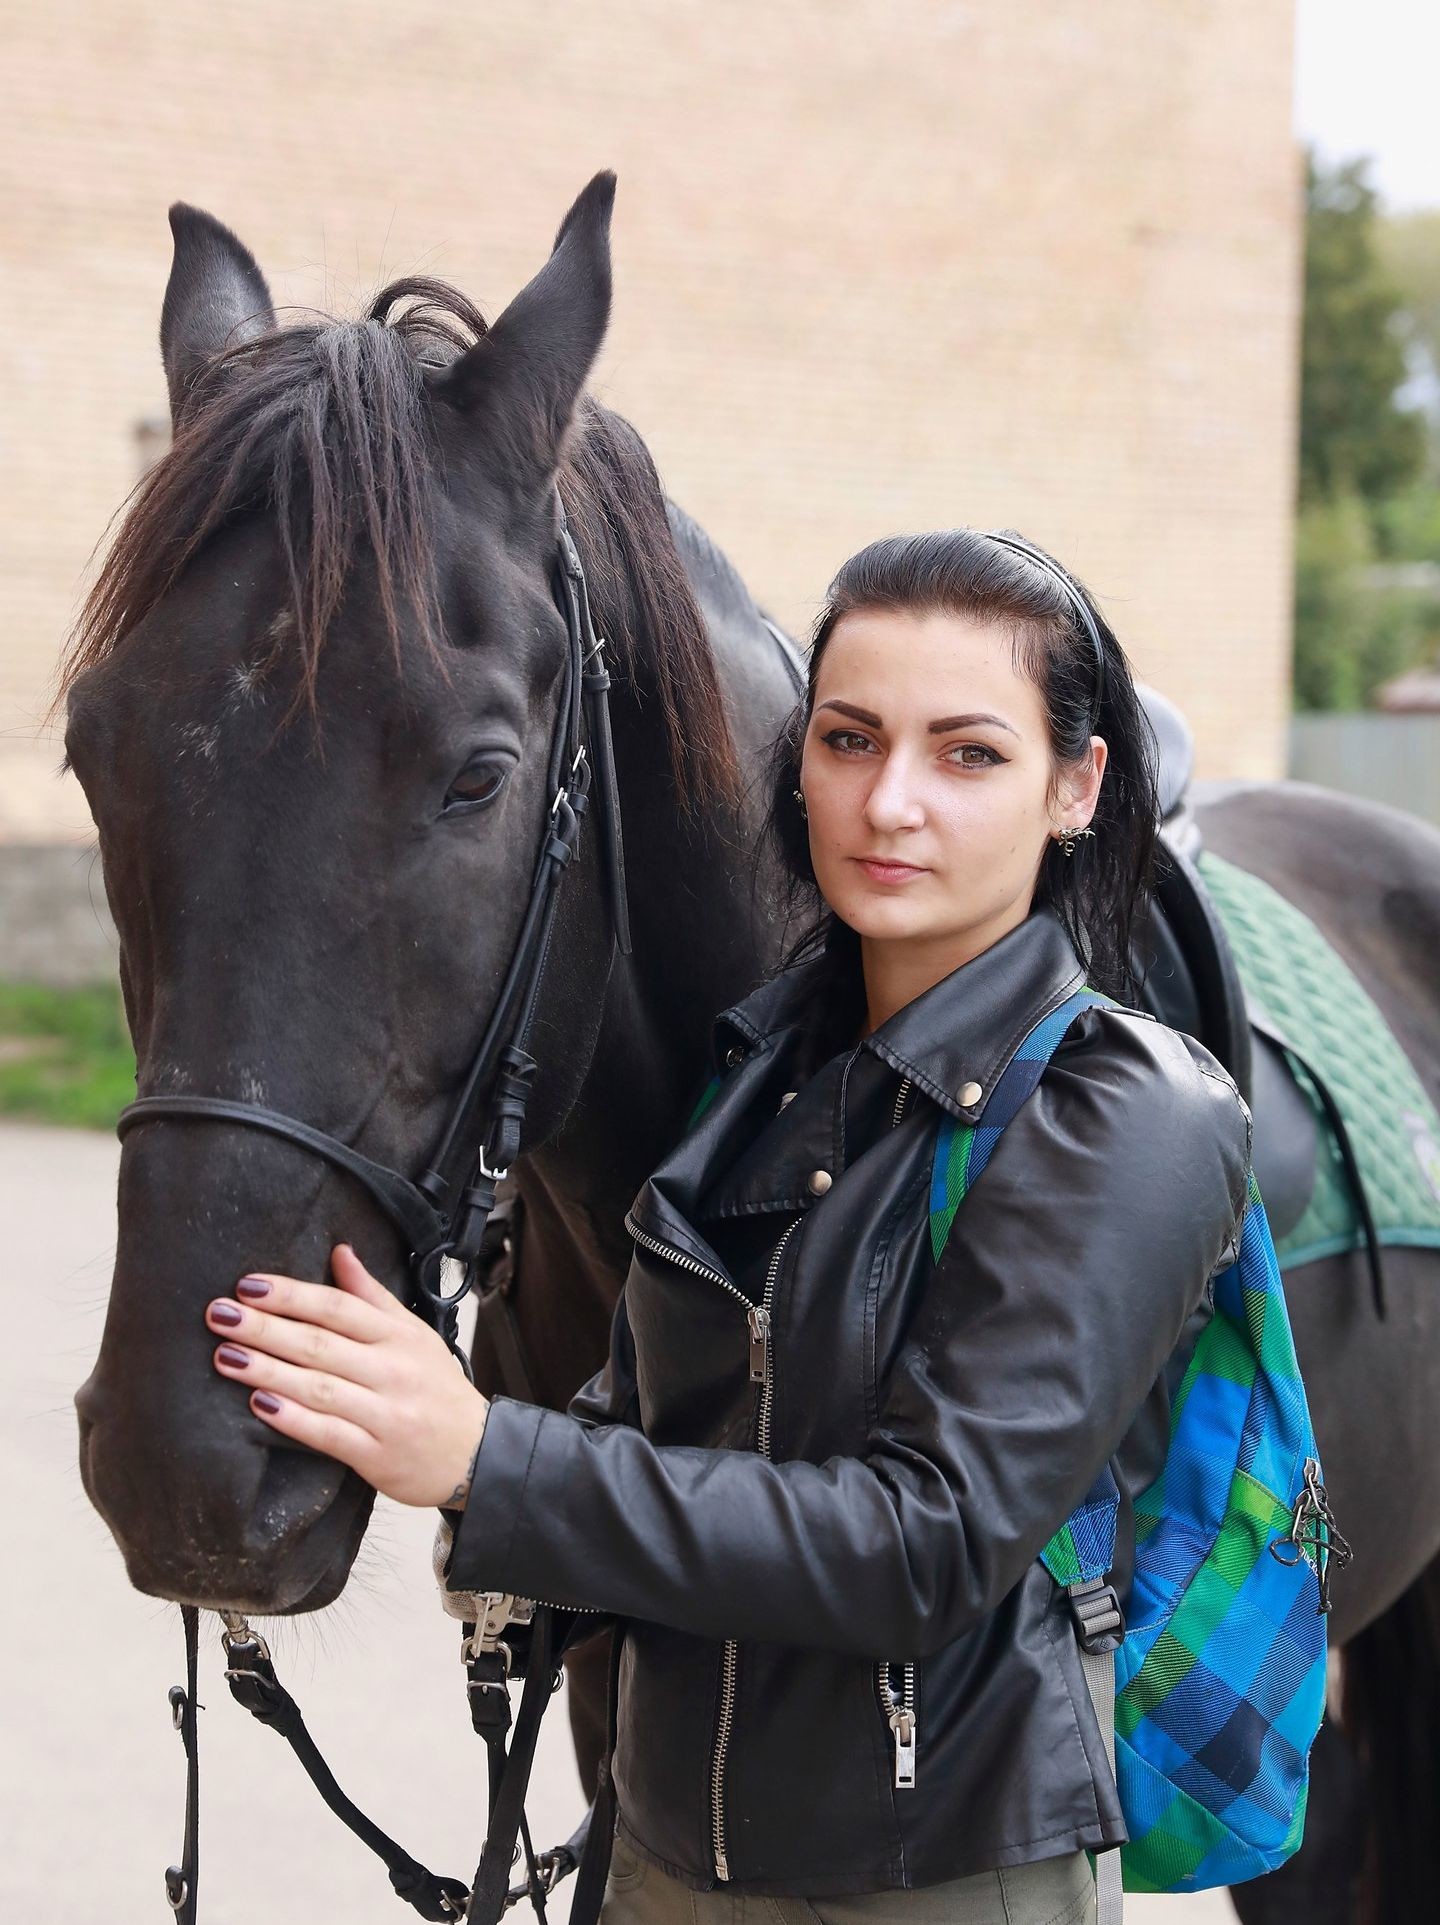 Maria Rubtsova with her horse.